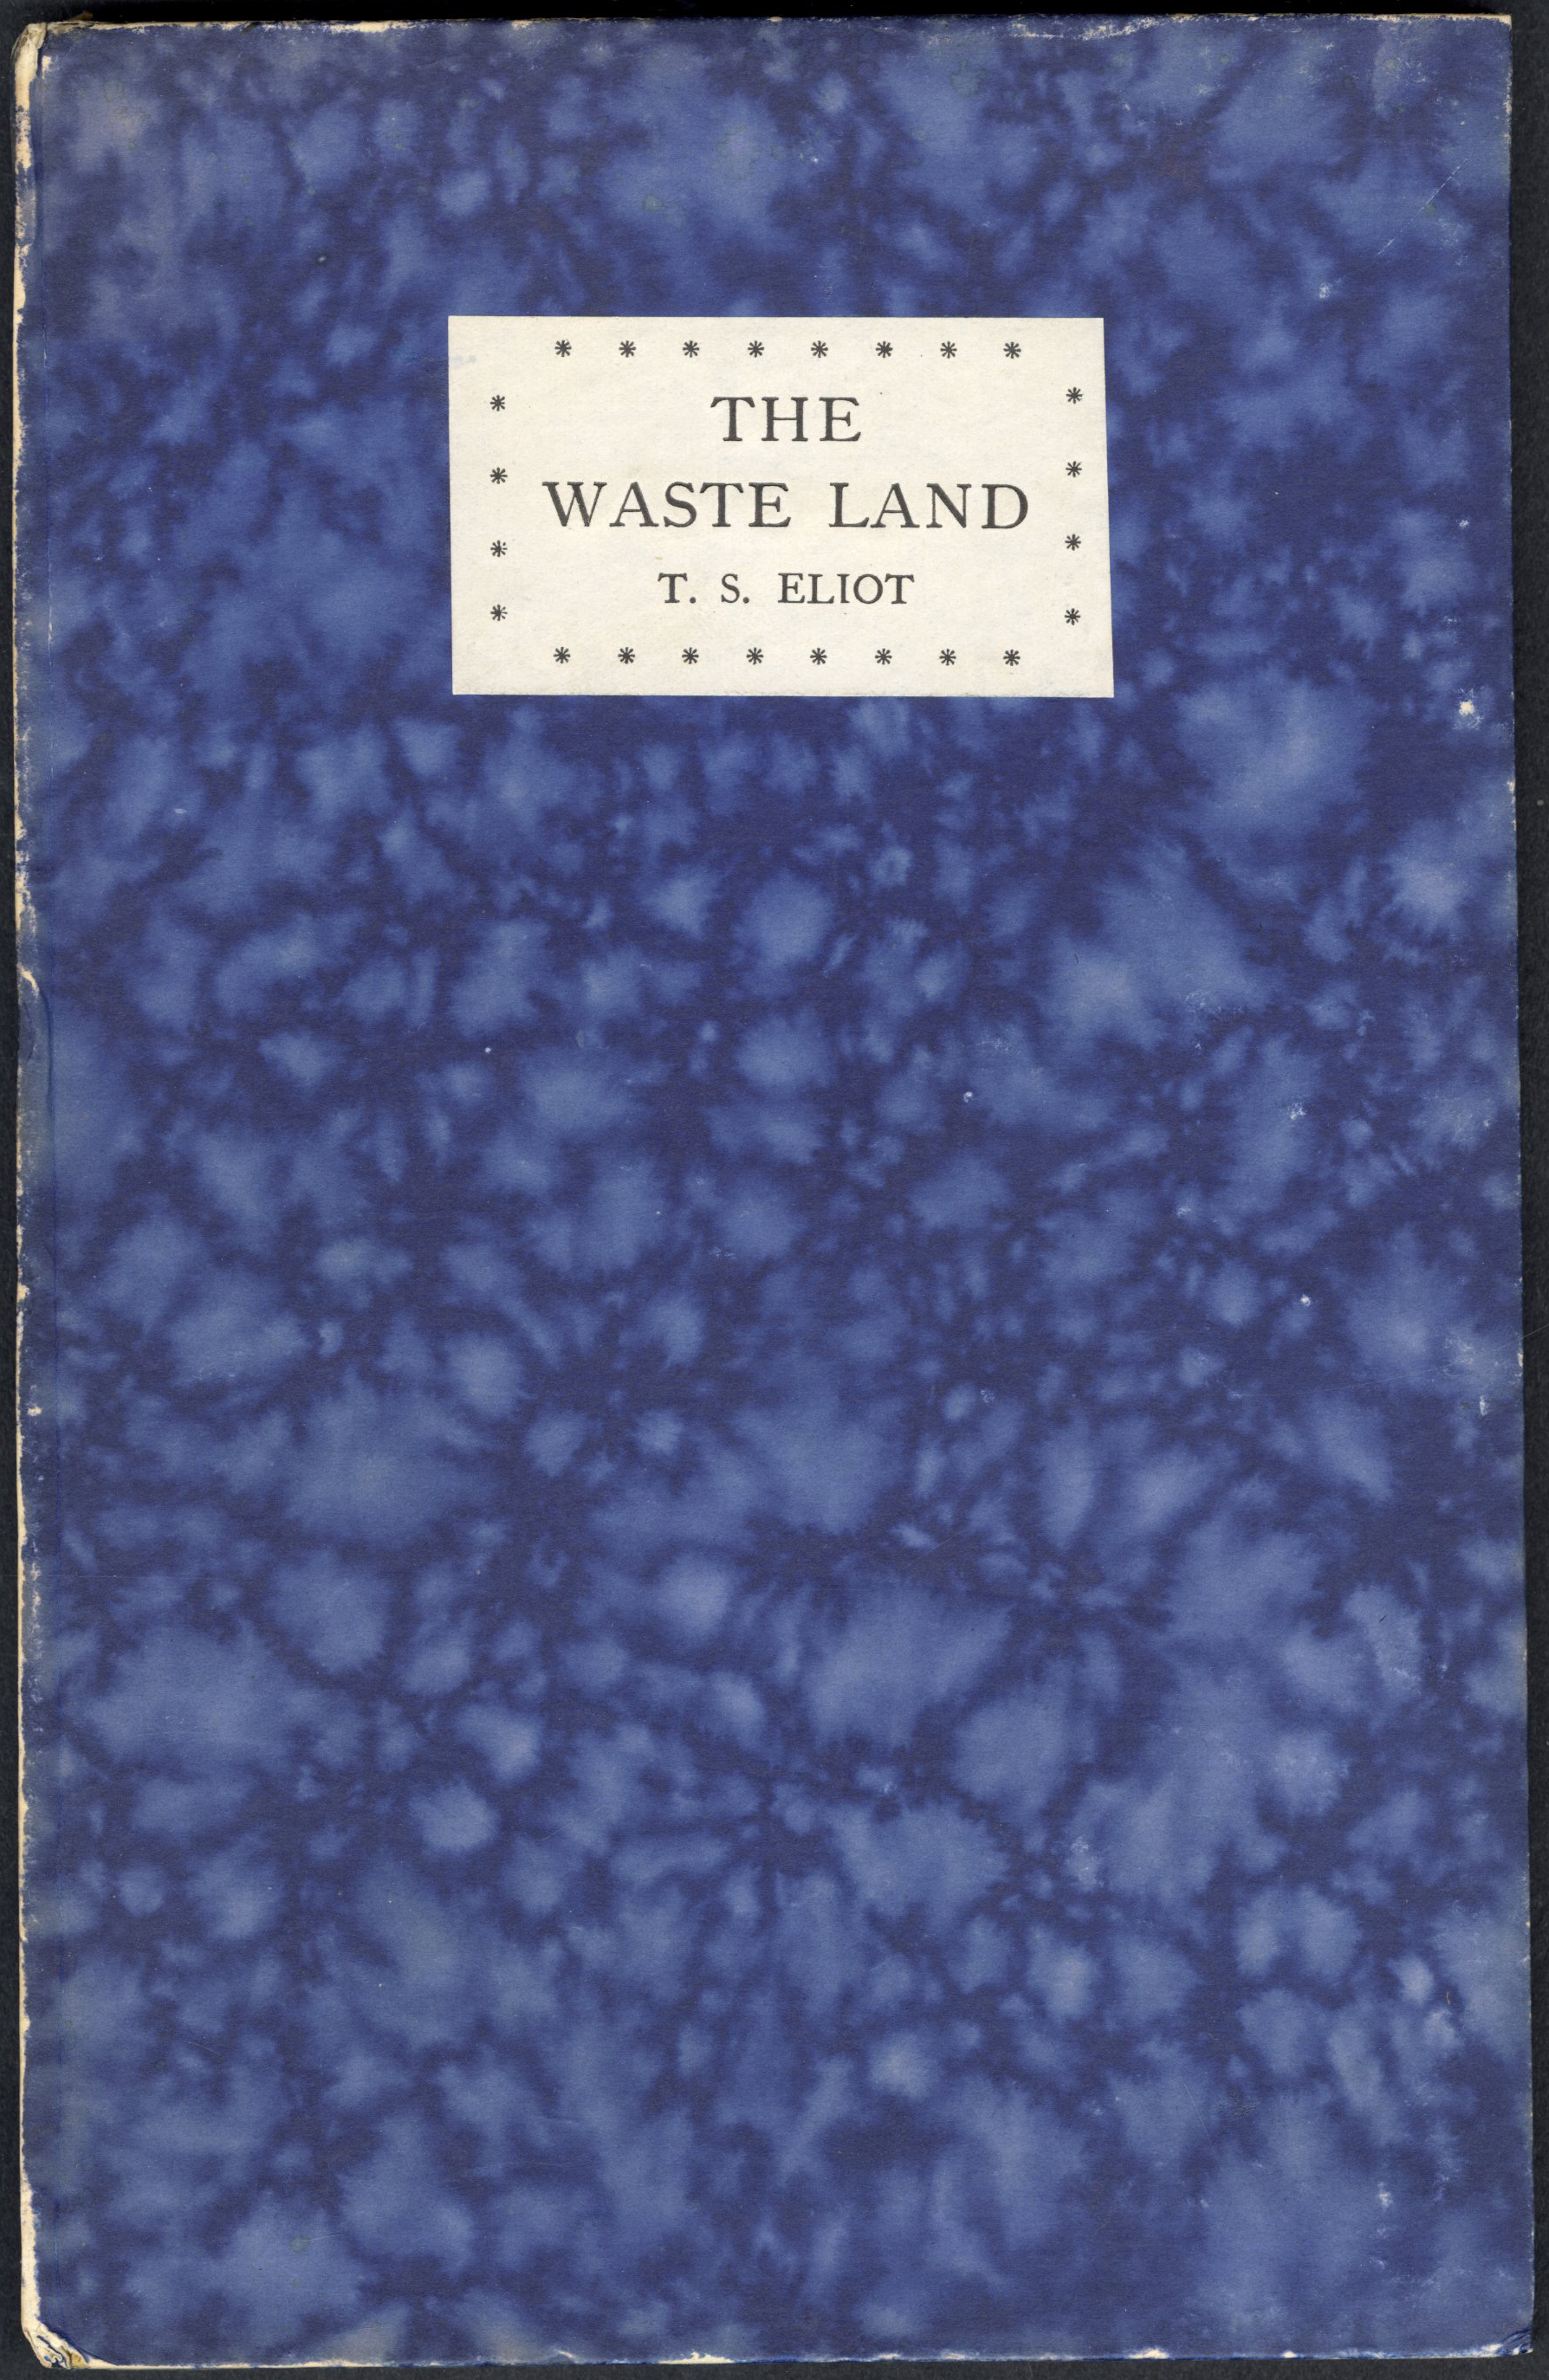 First edition of The Waste Land by T.S. Eliot: Hogarth Press: 1923